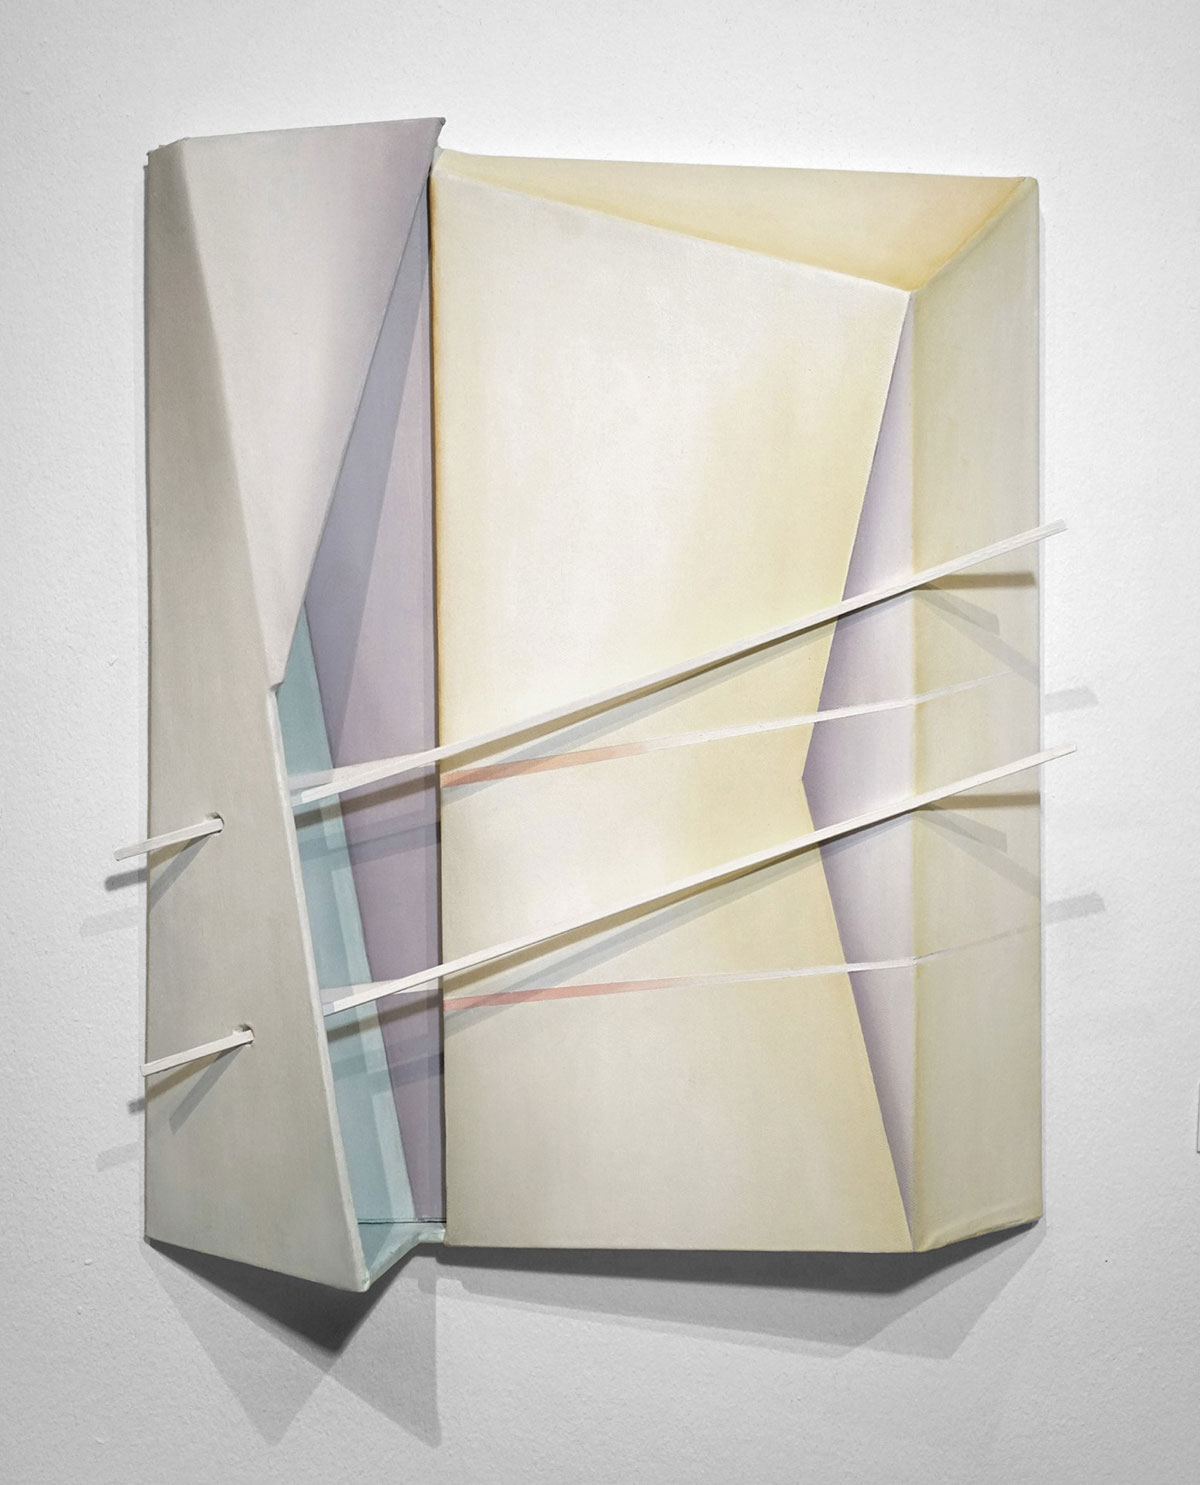 A vertical, 3D sculptural artwork with white, green, purple, and yellow intersecting geometric shapes.